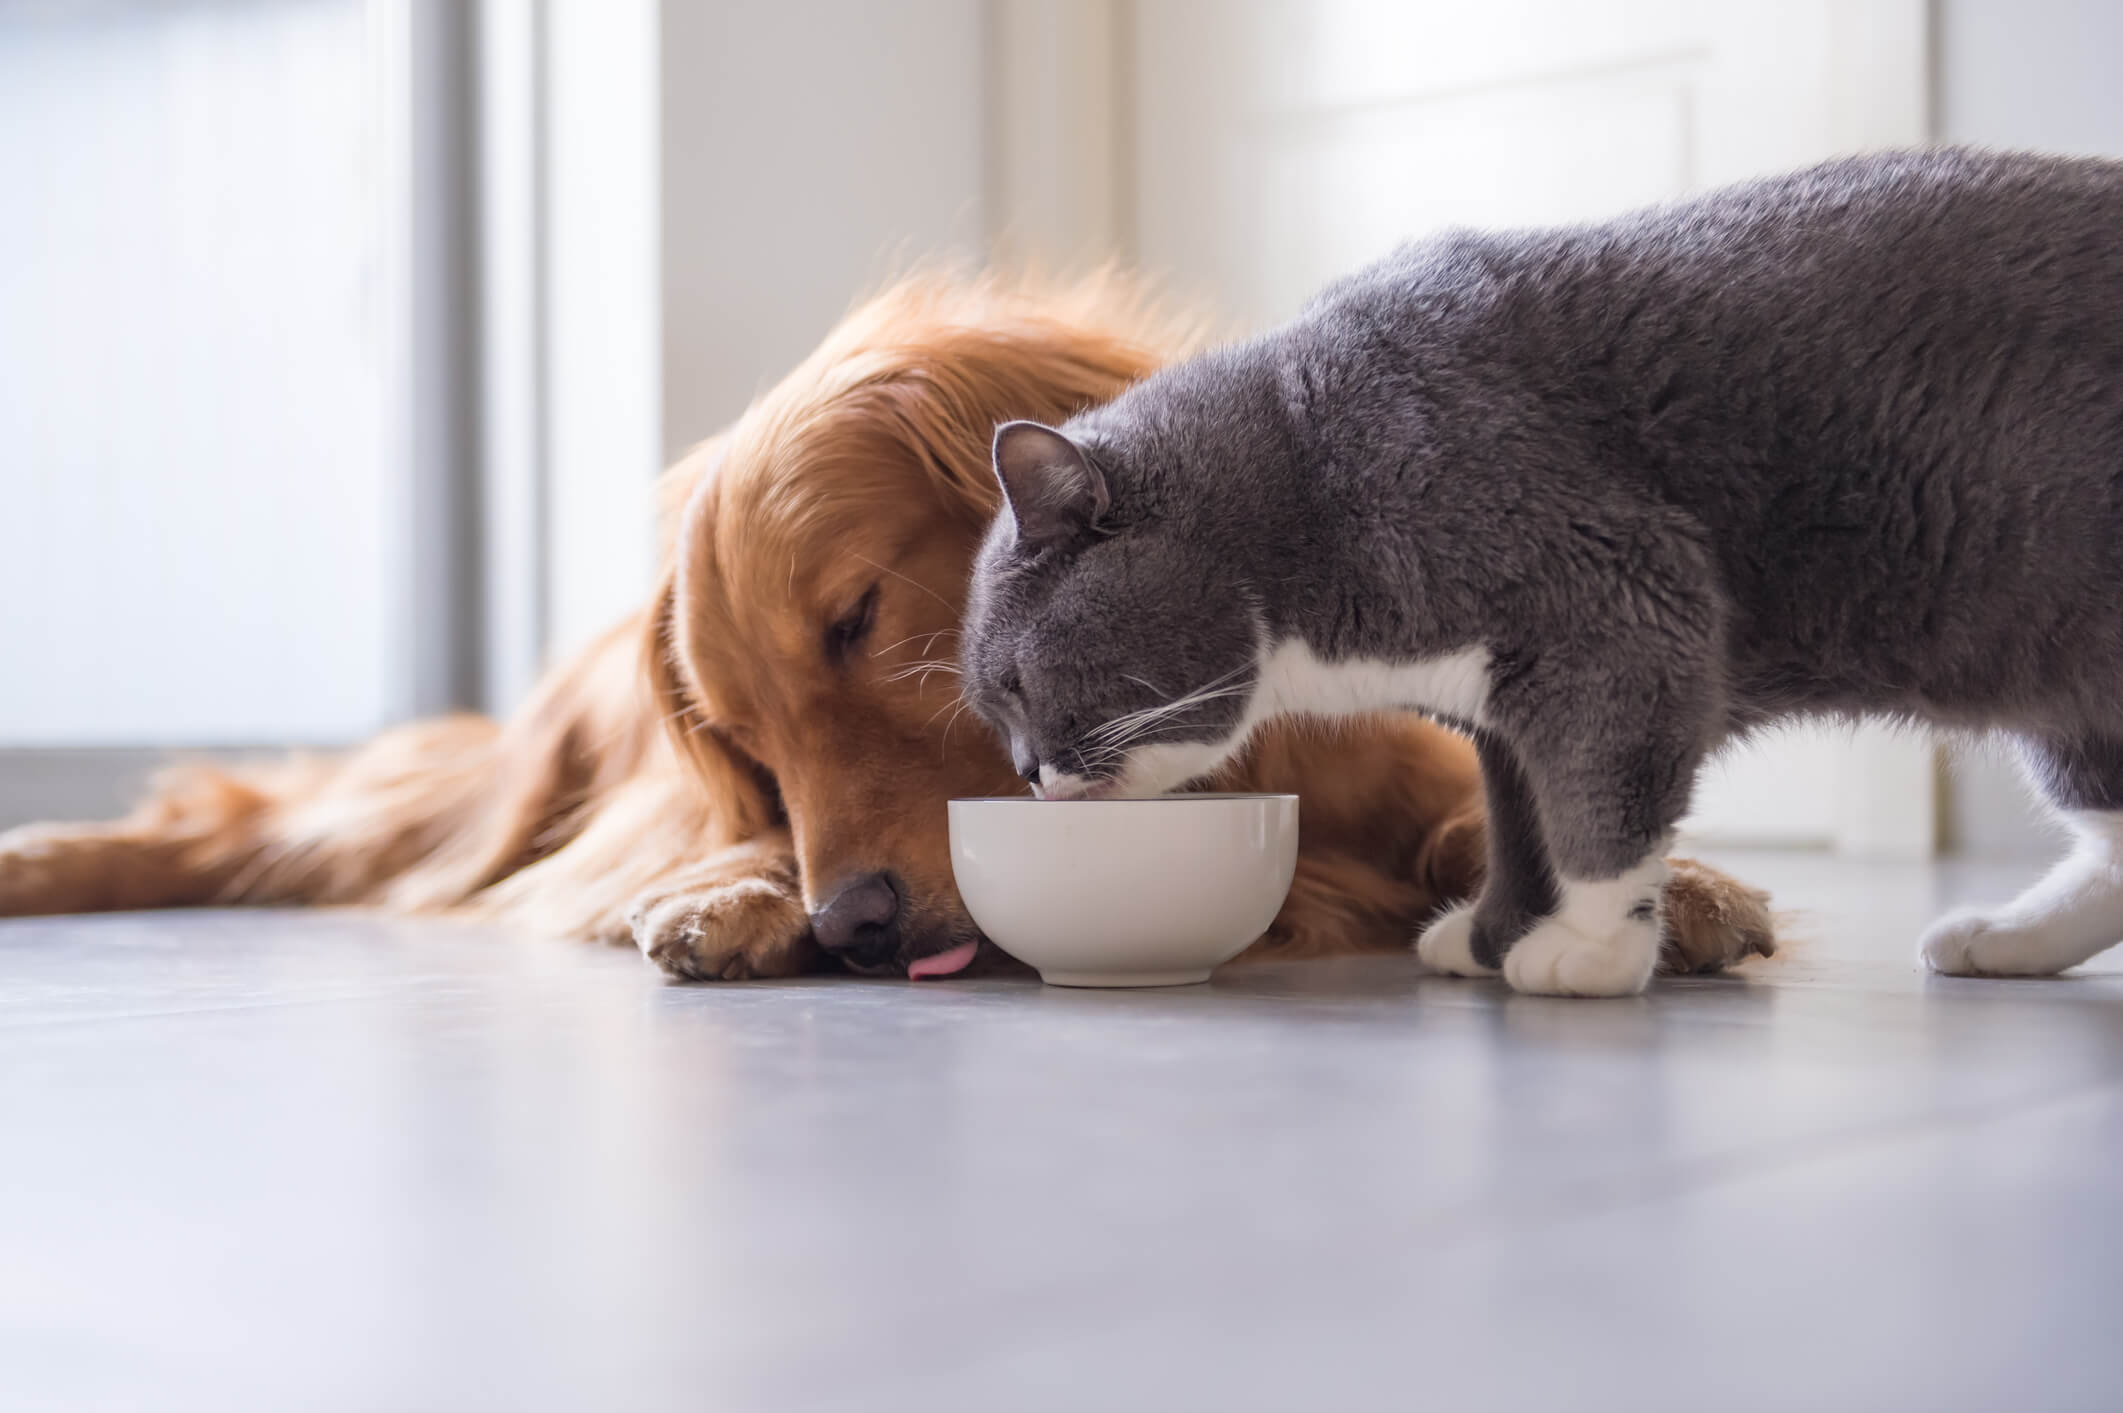 Puppy and kitten sharing their food bowl